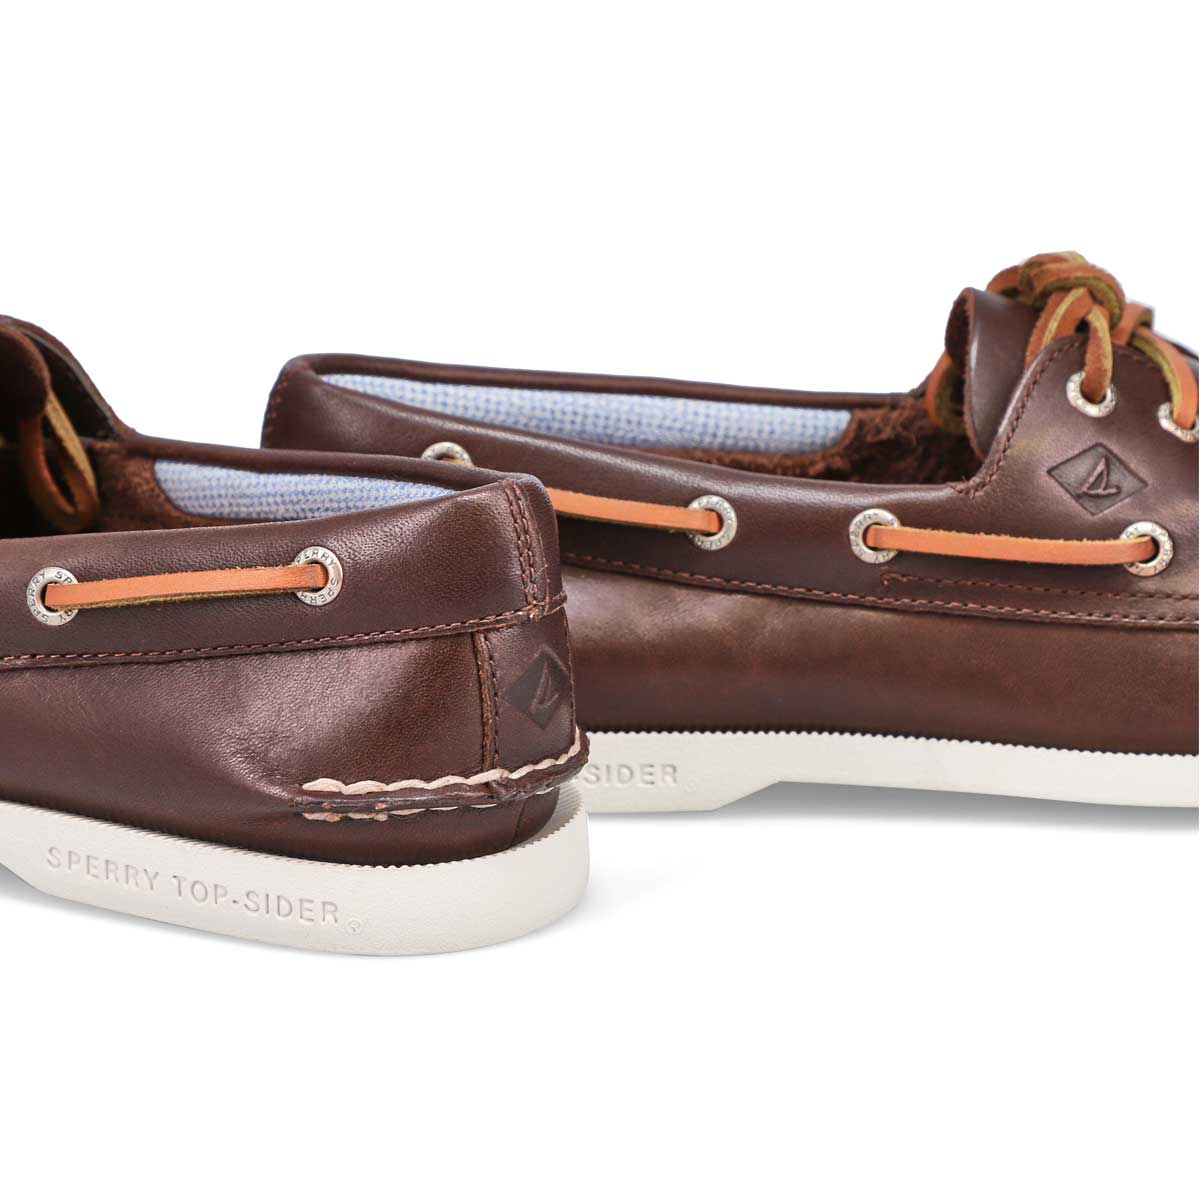 Buy > sperry plush wave review > in stock